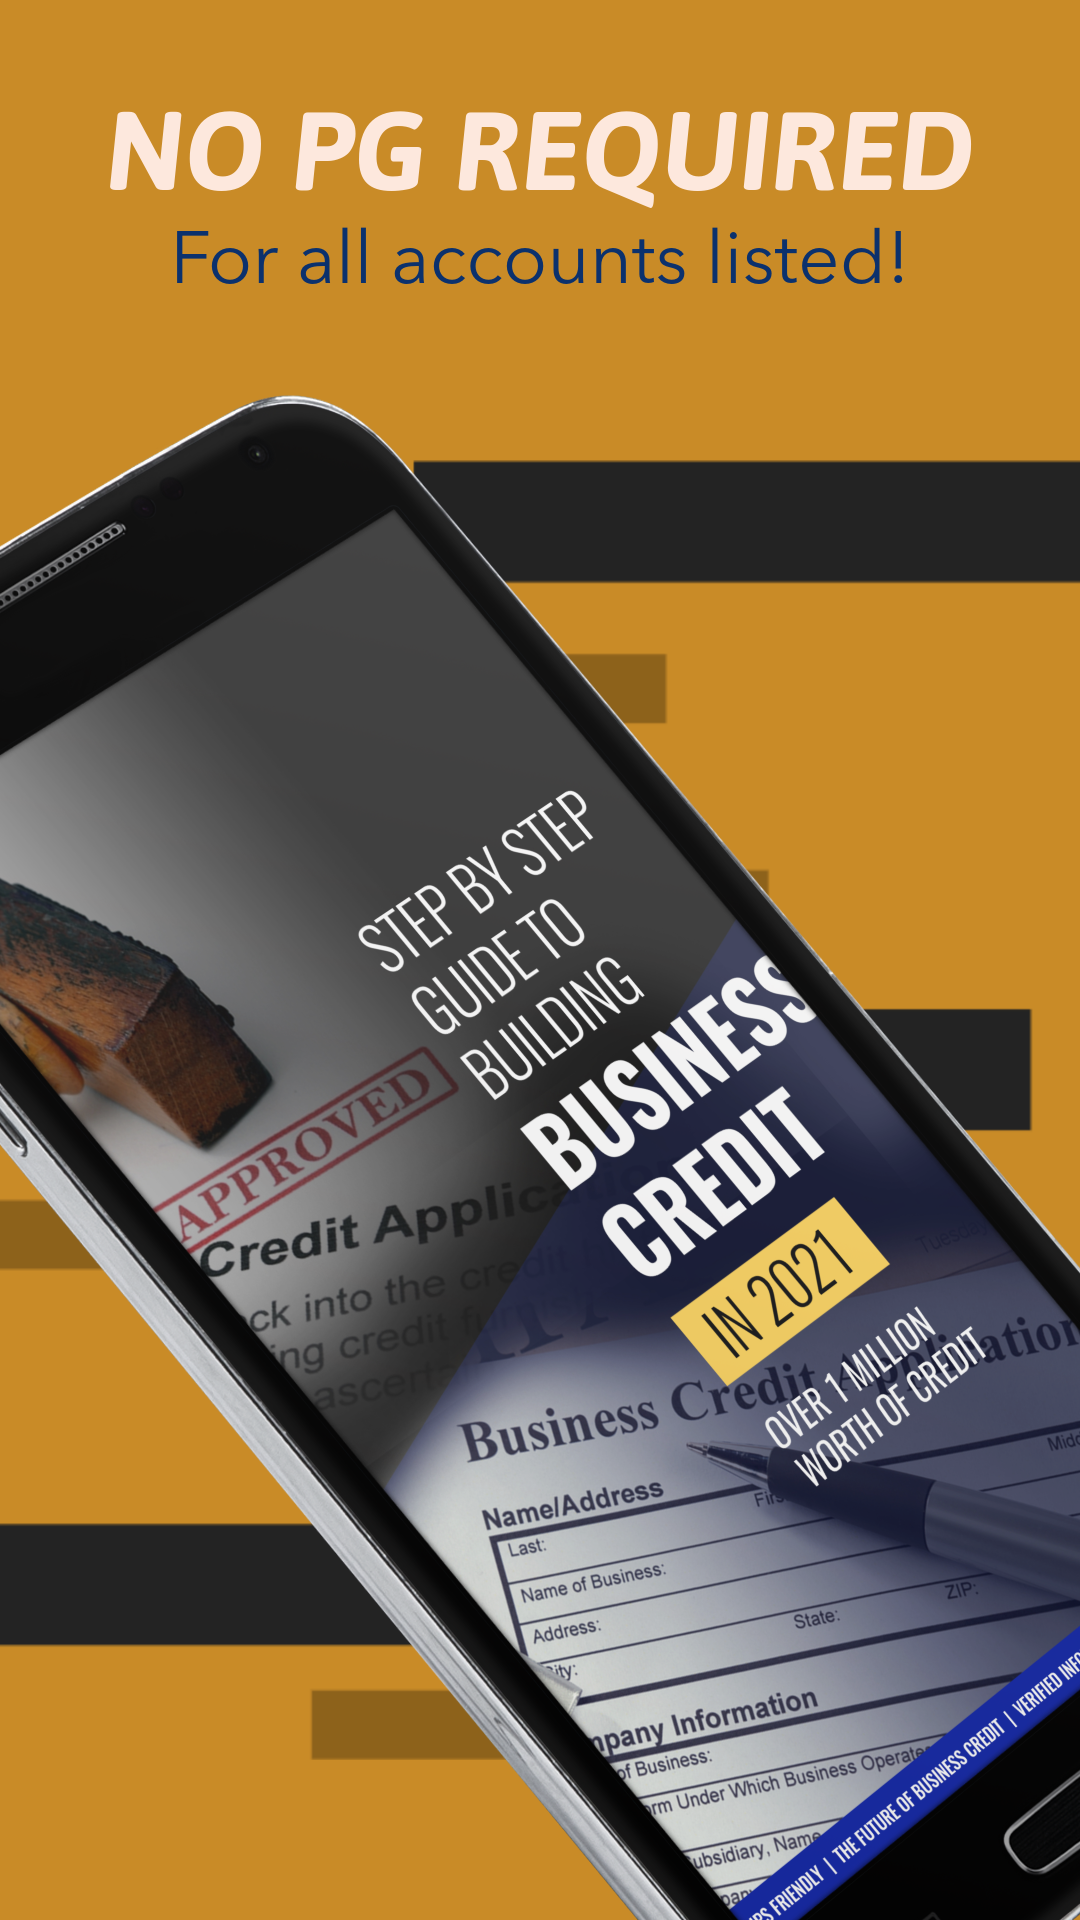 STEP BY STEP GUIDE TO BUILDING BUSINESS CREDIT LBM